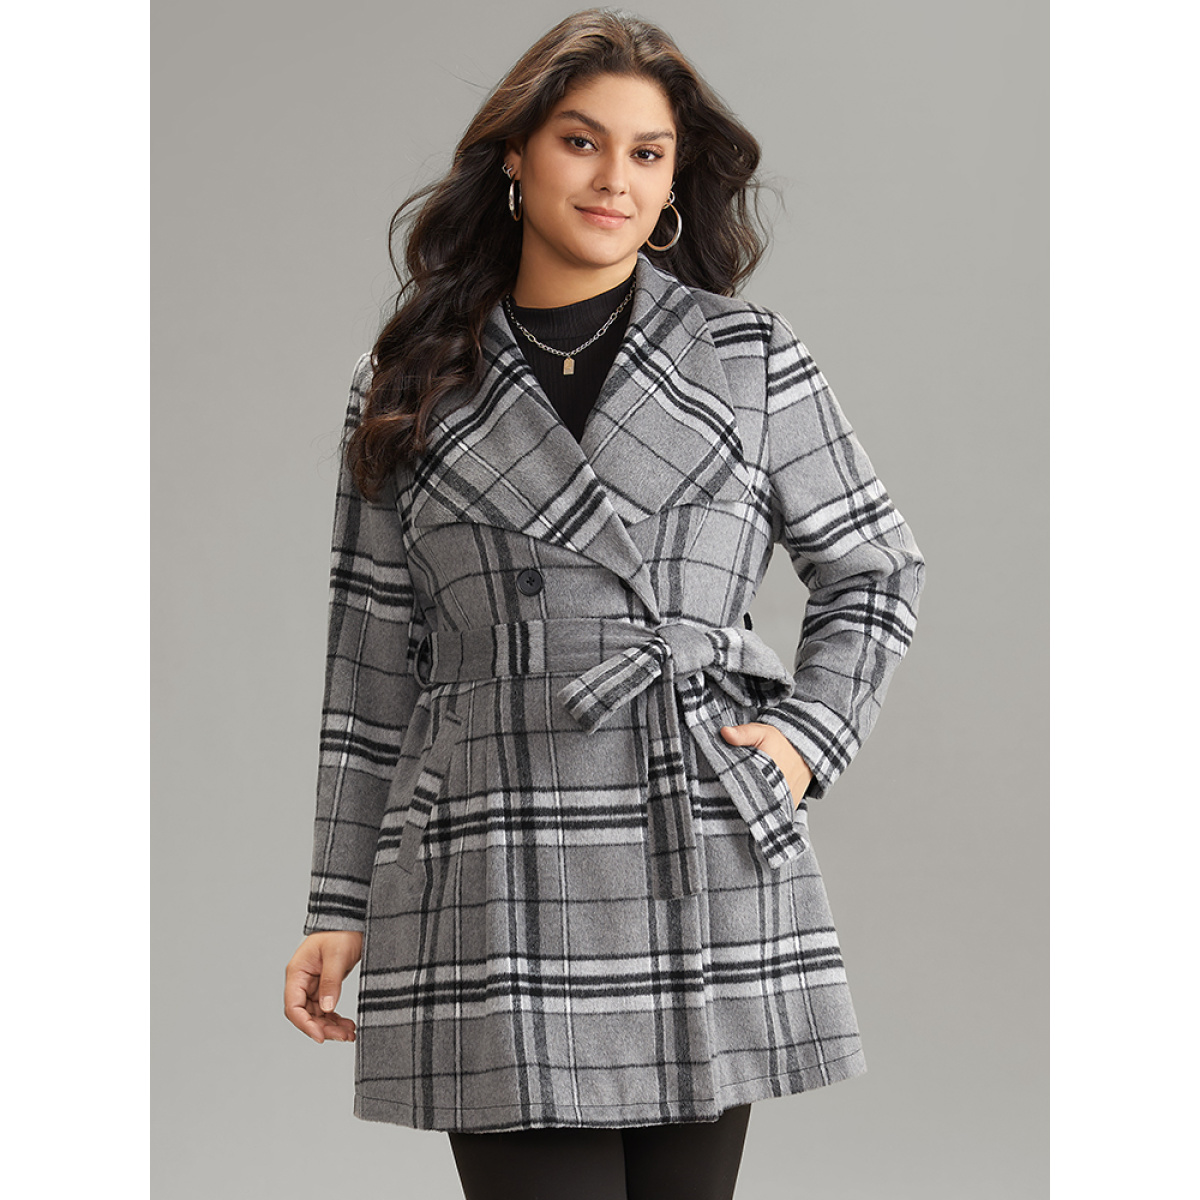 

Plus Size Plaid Button Up Pocket Belted Lapel Collar Coat Women Black Casual Lined Ladies Dailywear Winter Coats BloomChic